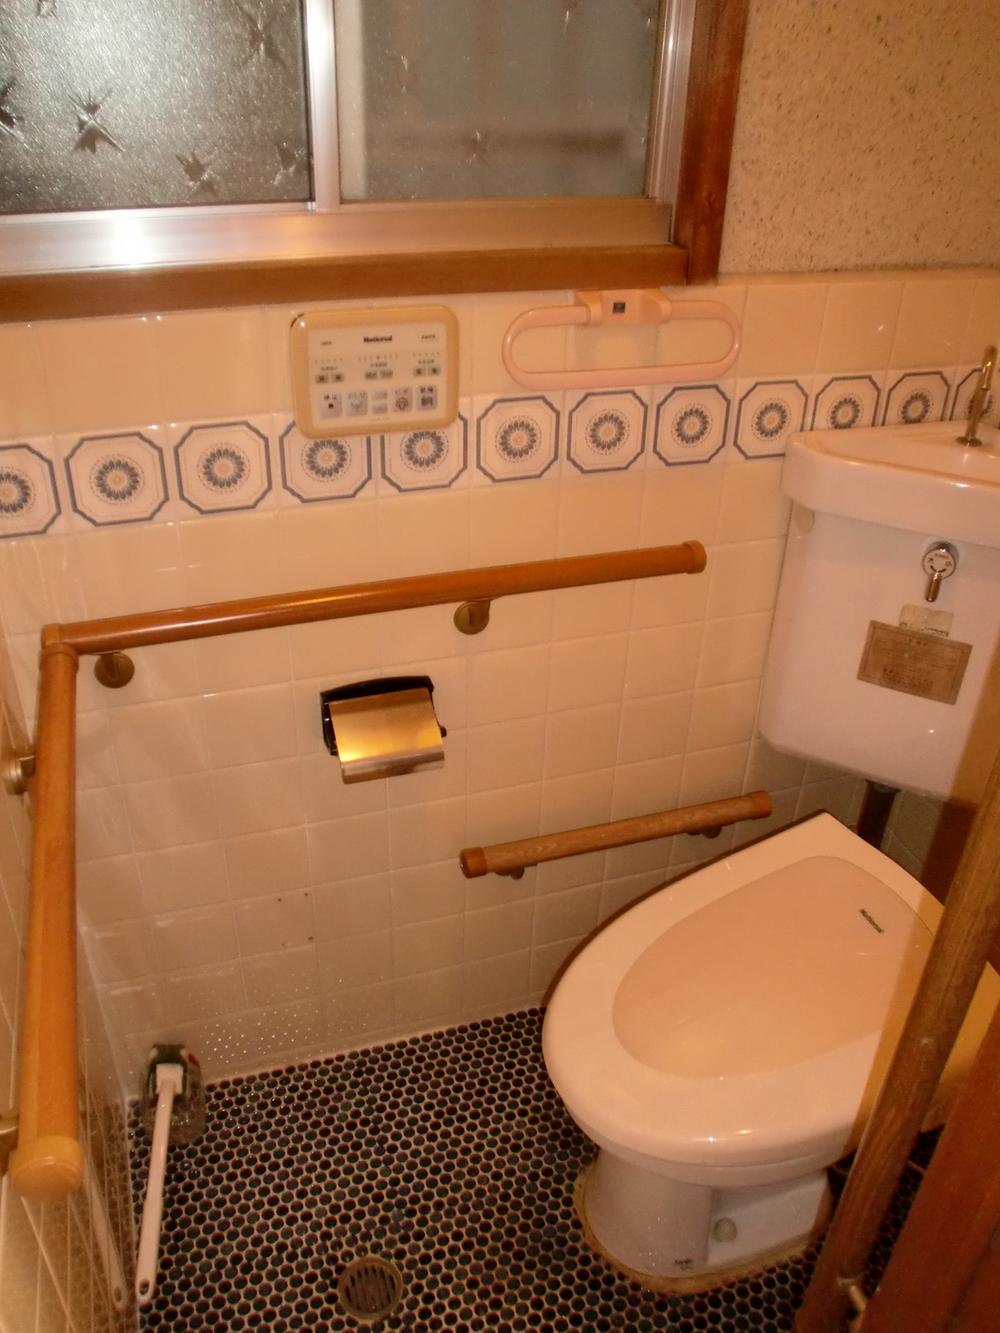 Toilet. It is safe with handrail. 